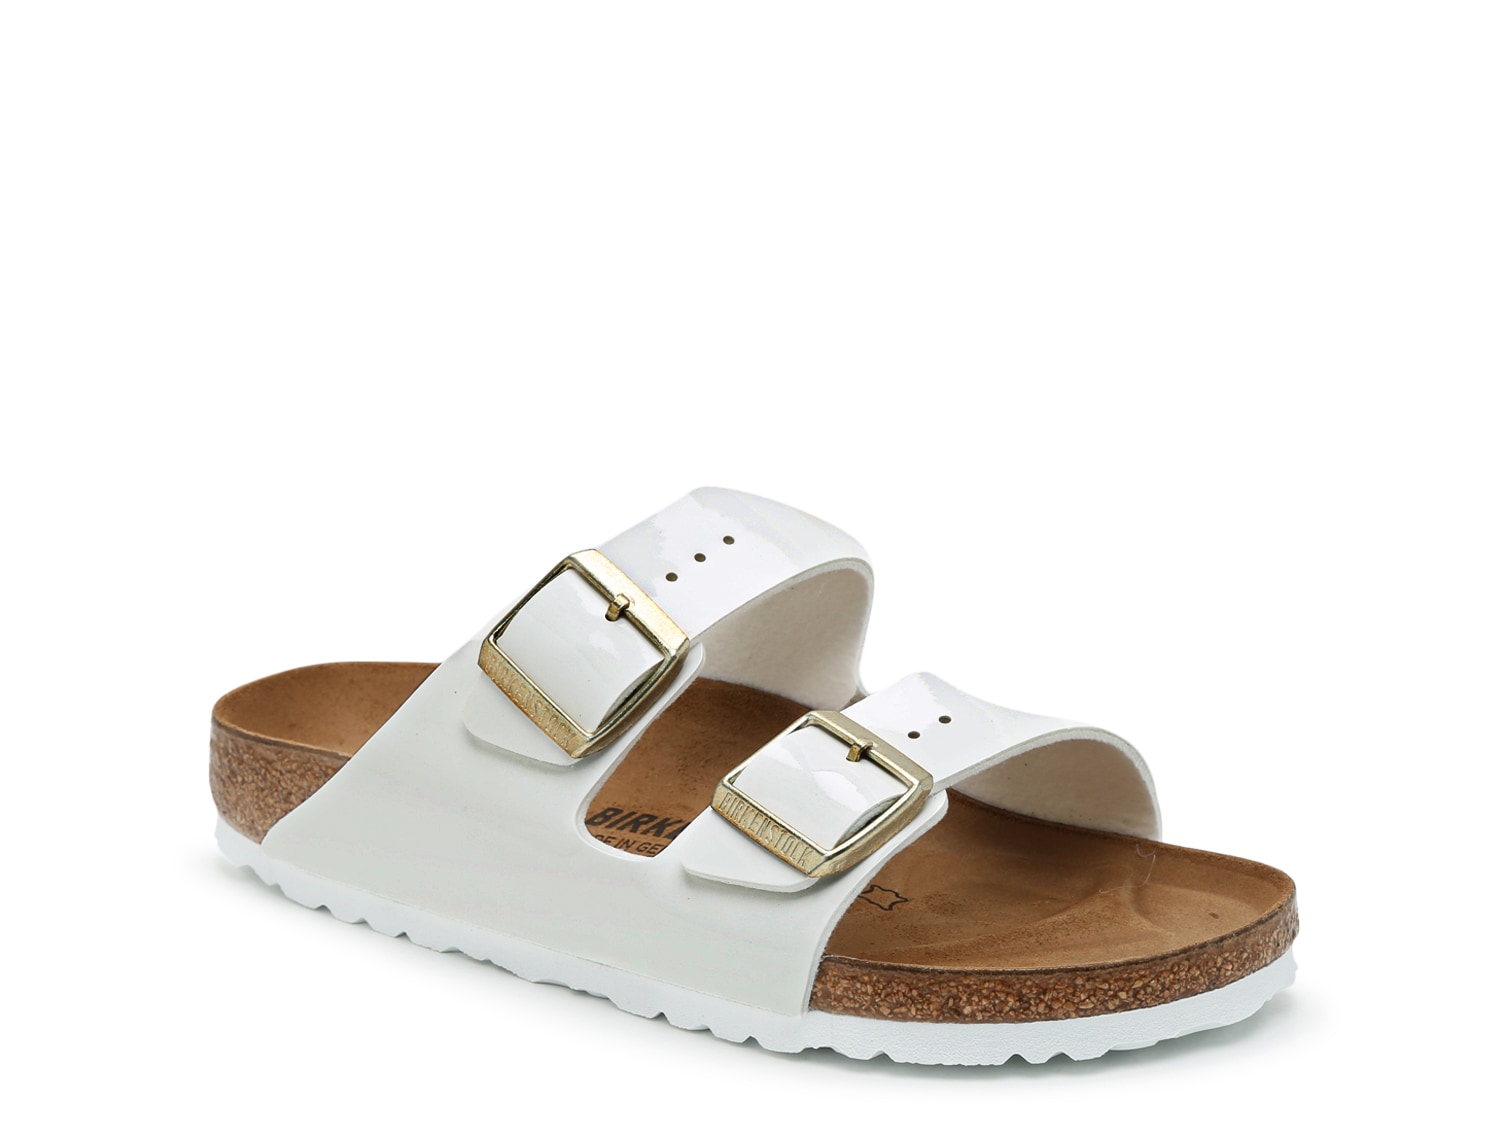 where can i buy birkenstock shoes near me